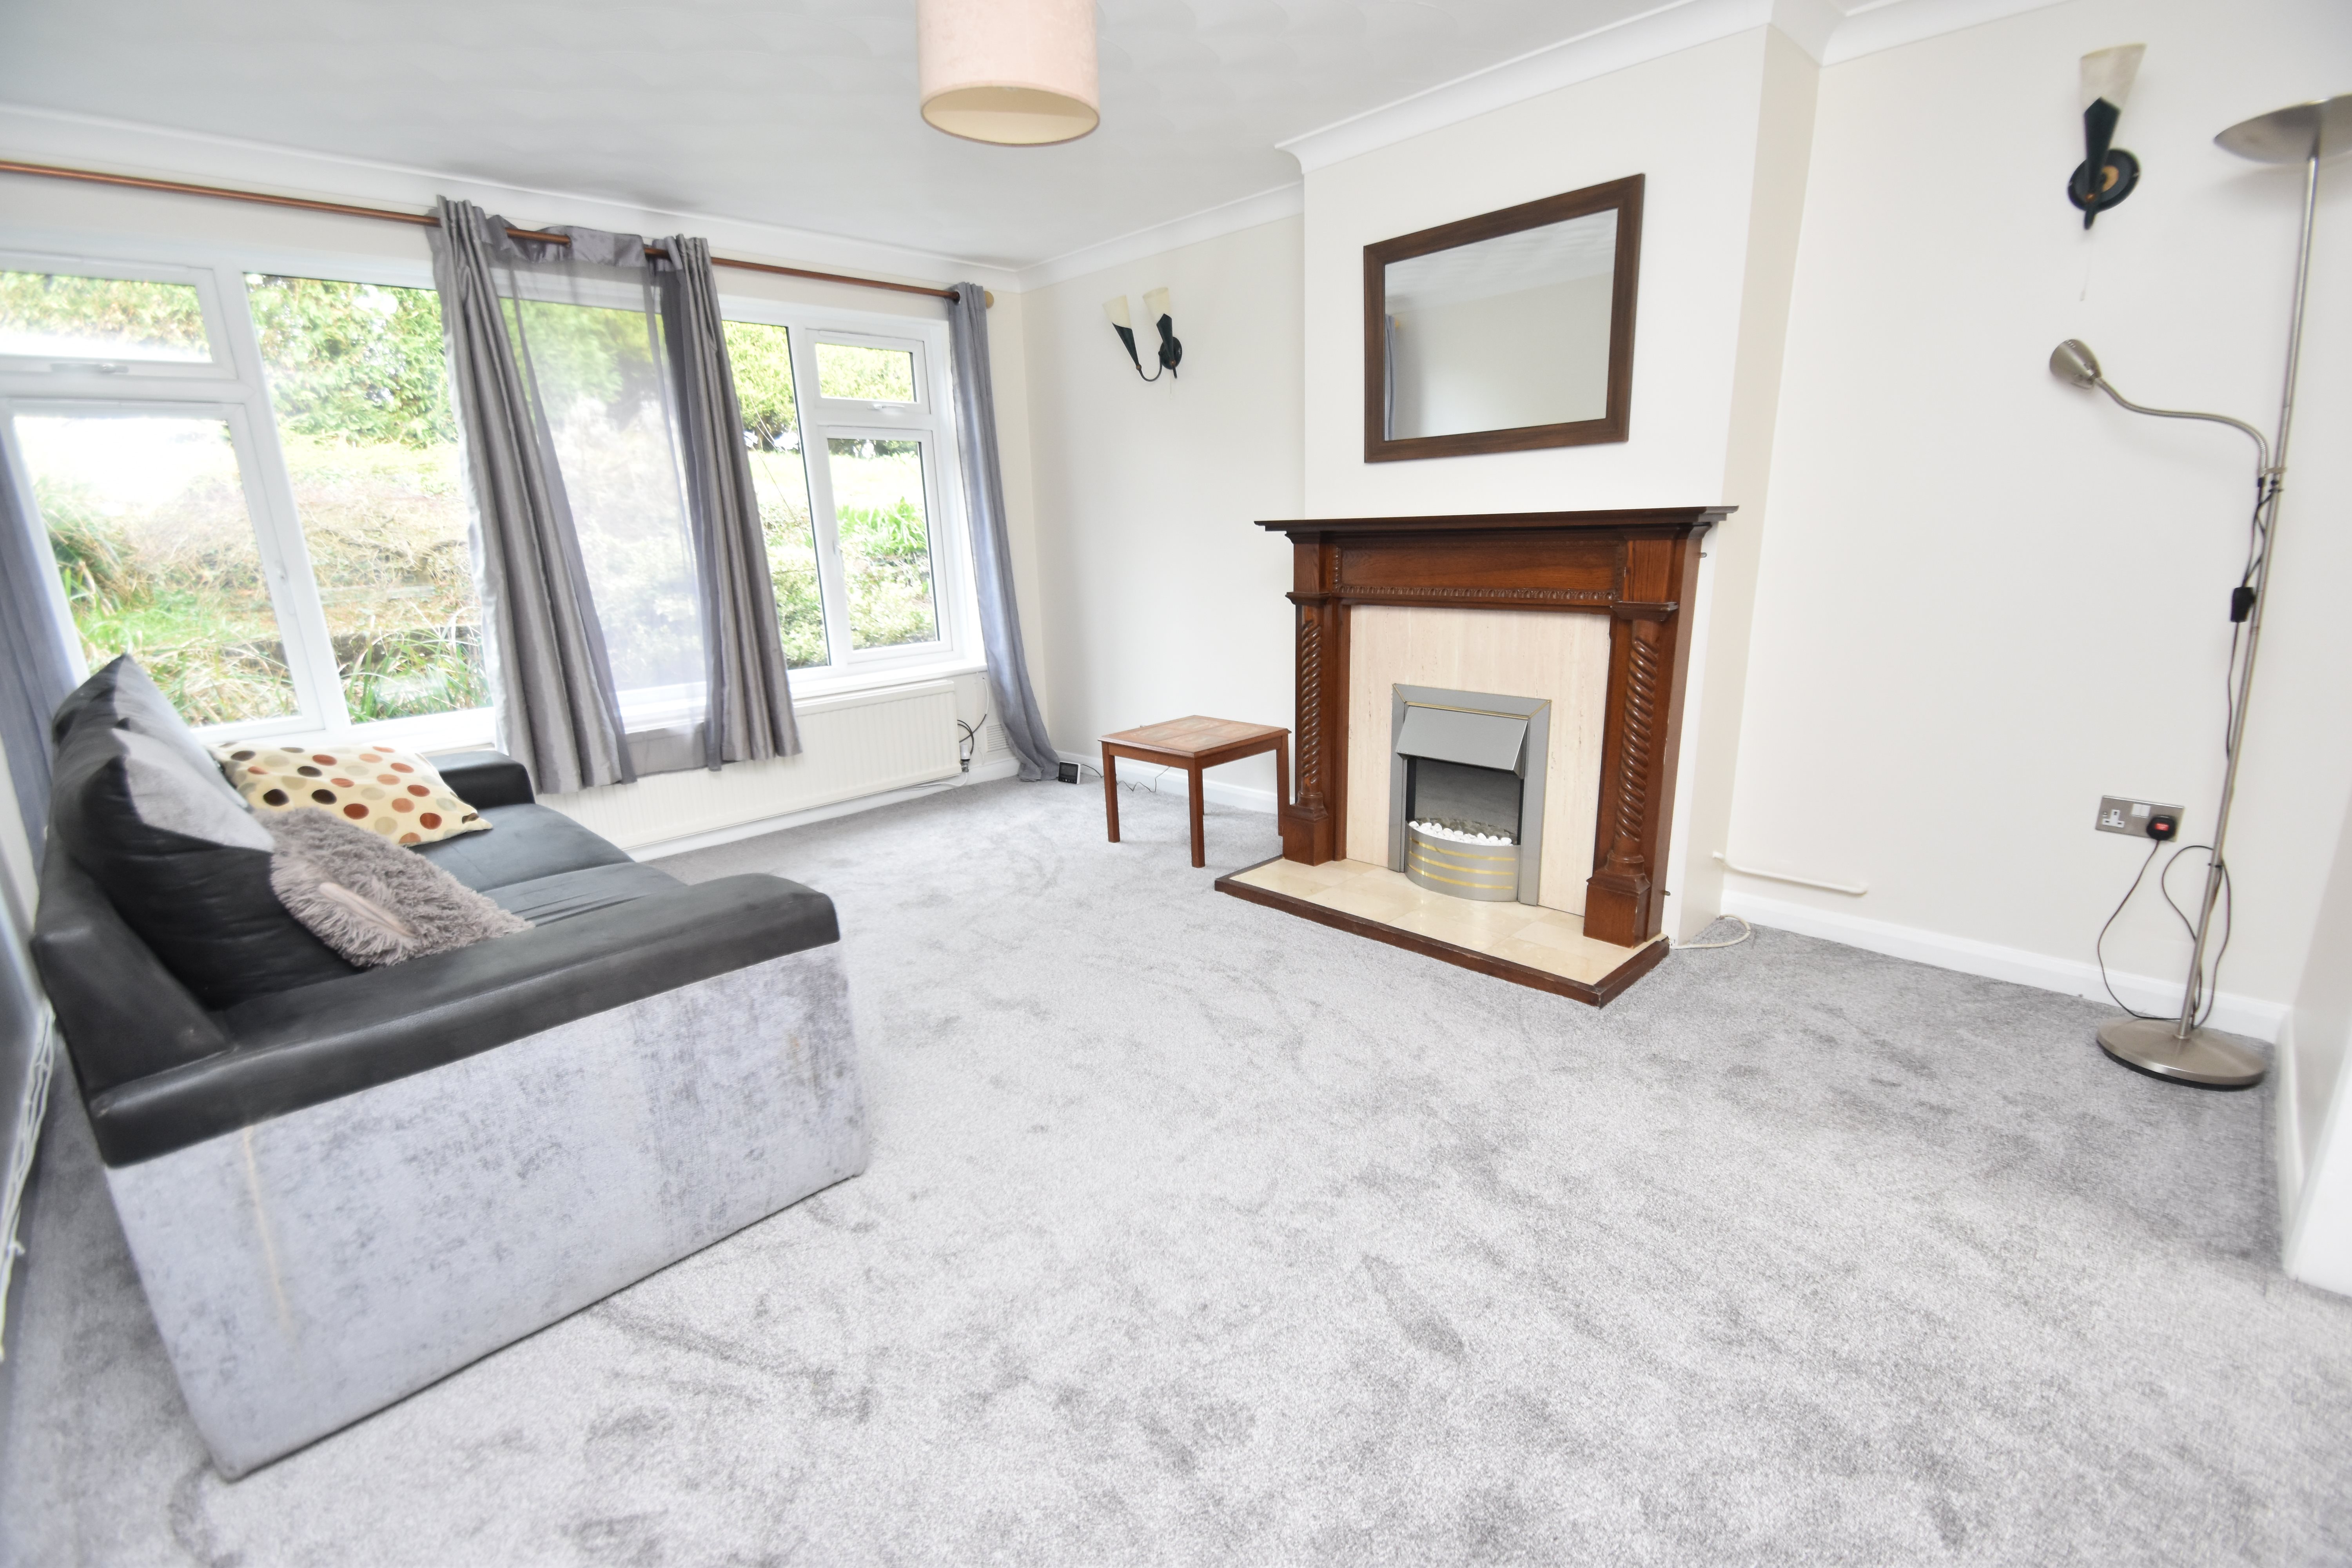 3 bed house to rent in Queenwood, Penylan - Property Image 1